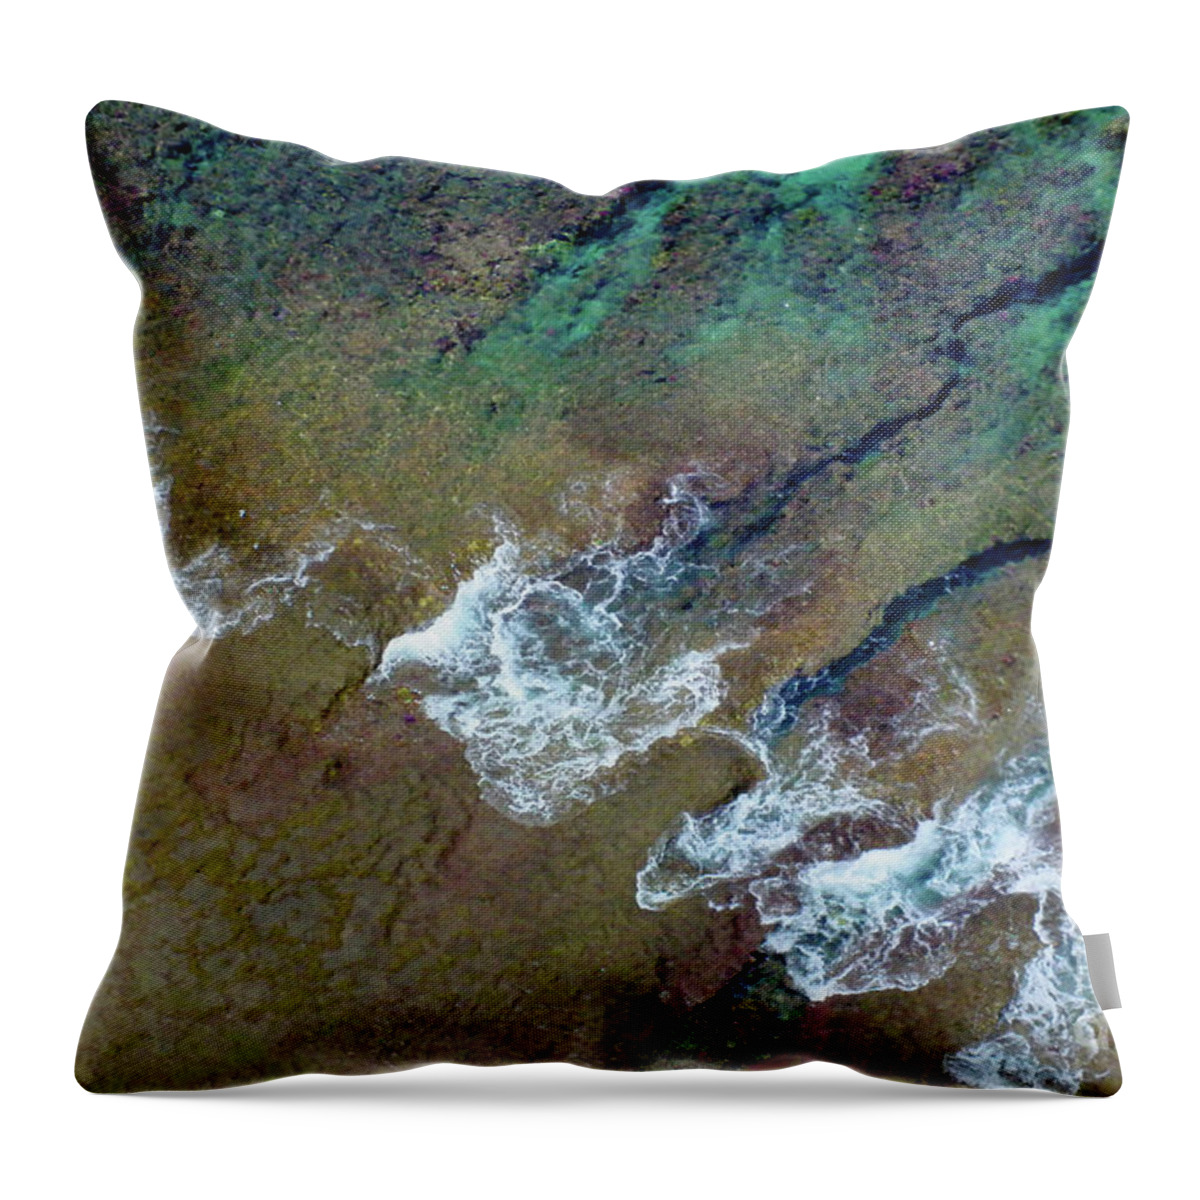 Ocean Lace-coral Reefs Throw Pillow featuring the photograph Coral Reef Seascape by Scott Cameron